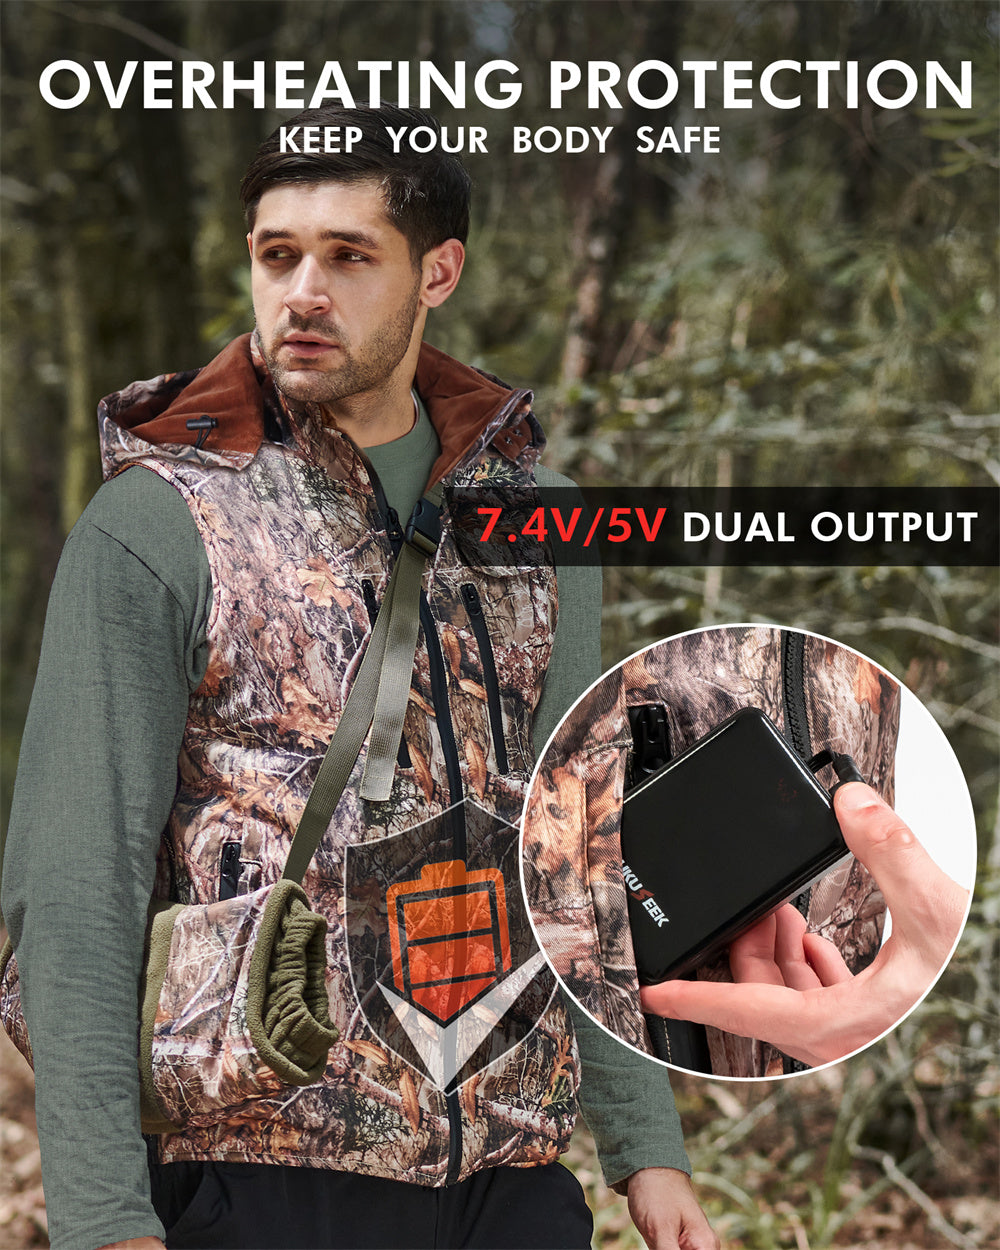 arris heated camo vest is easy and safe to use